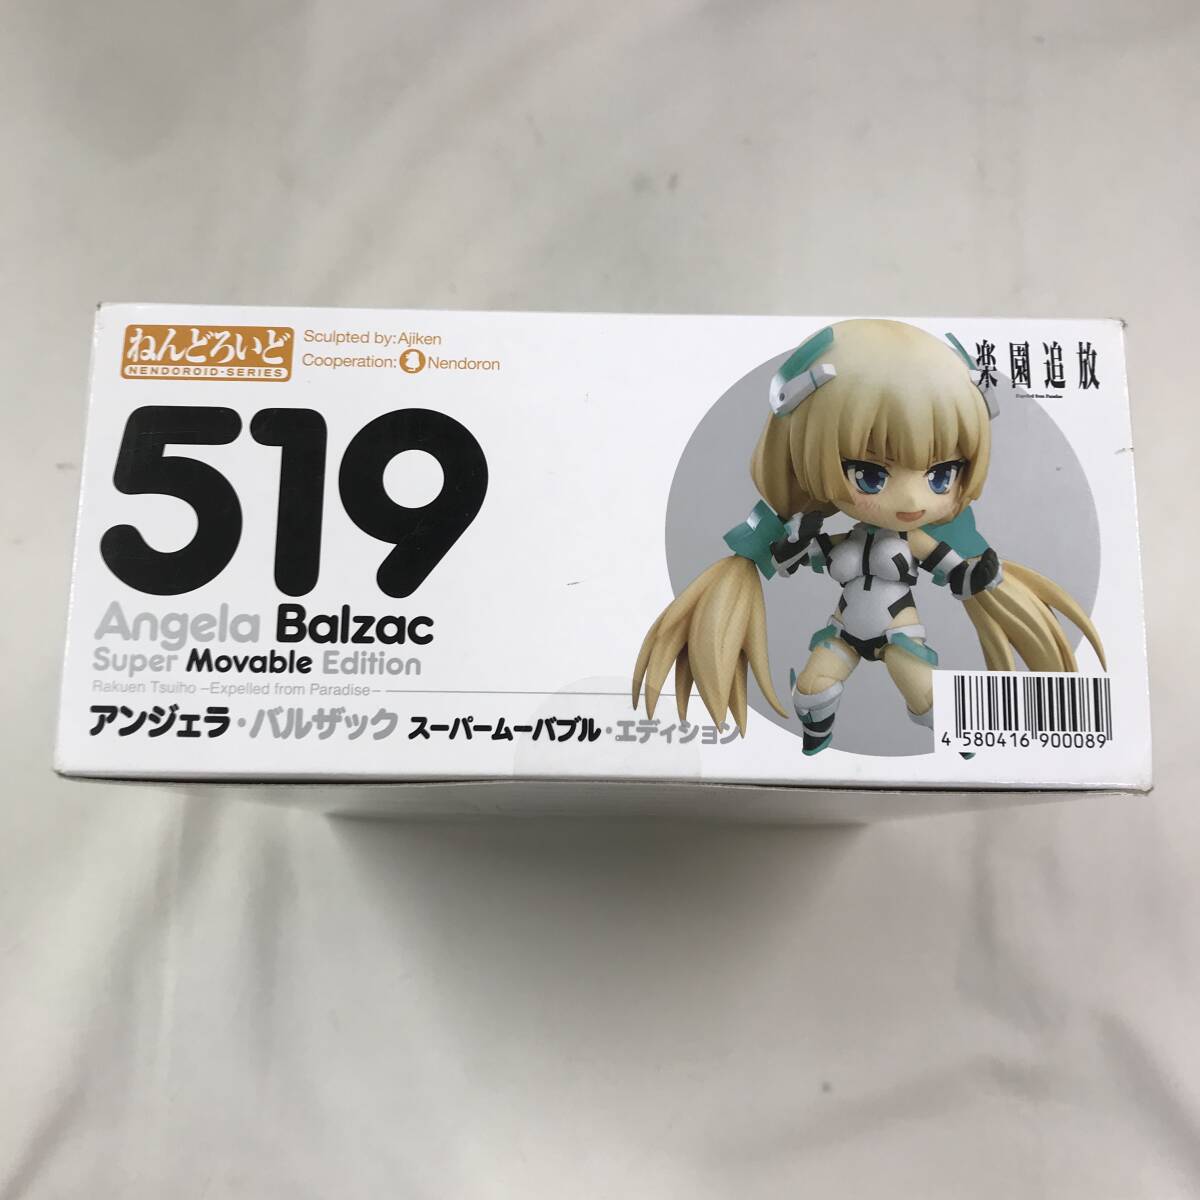 oy088 free shipping! unopened goods ......519 Anne jela* Balzac [ comfort ...-Expelled from Paradise-]